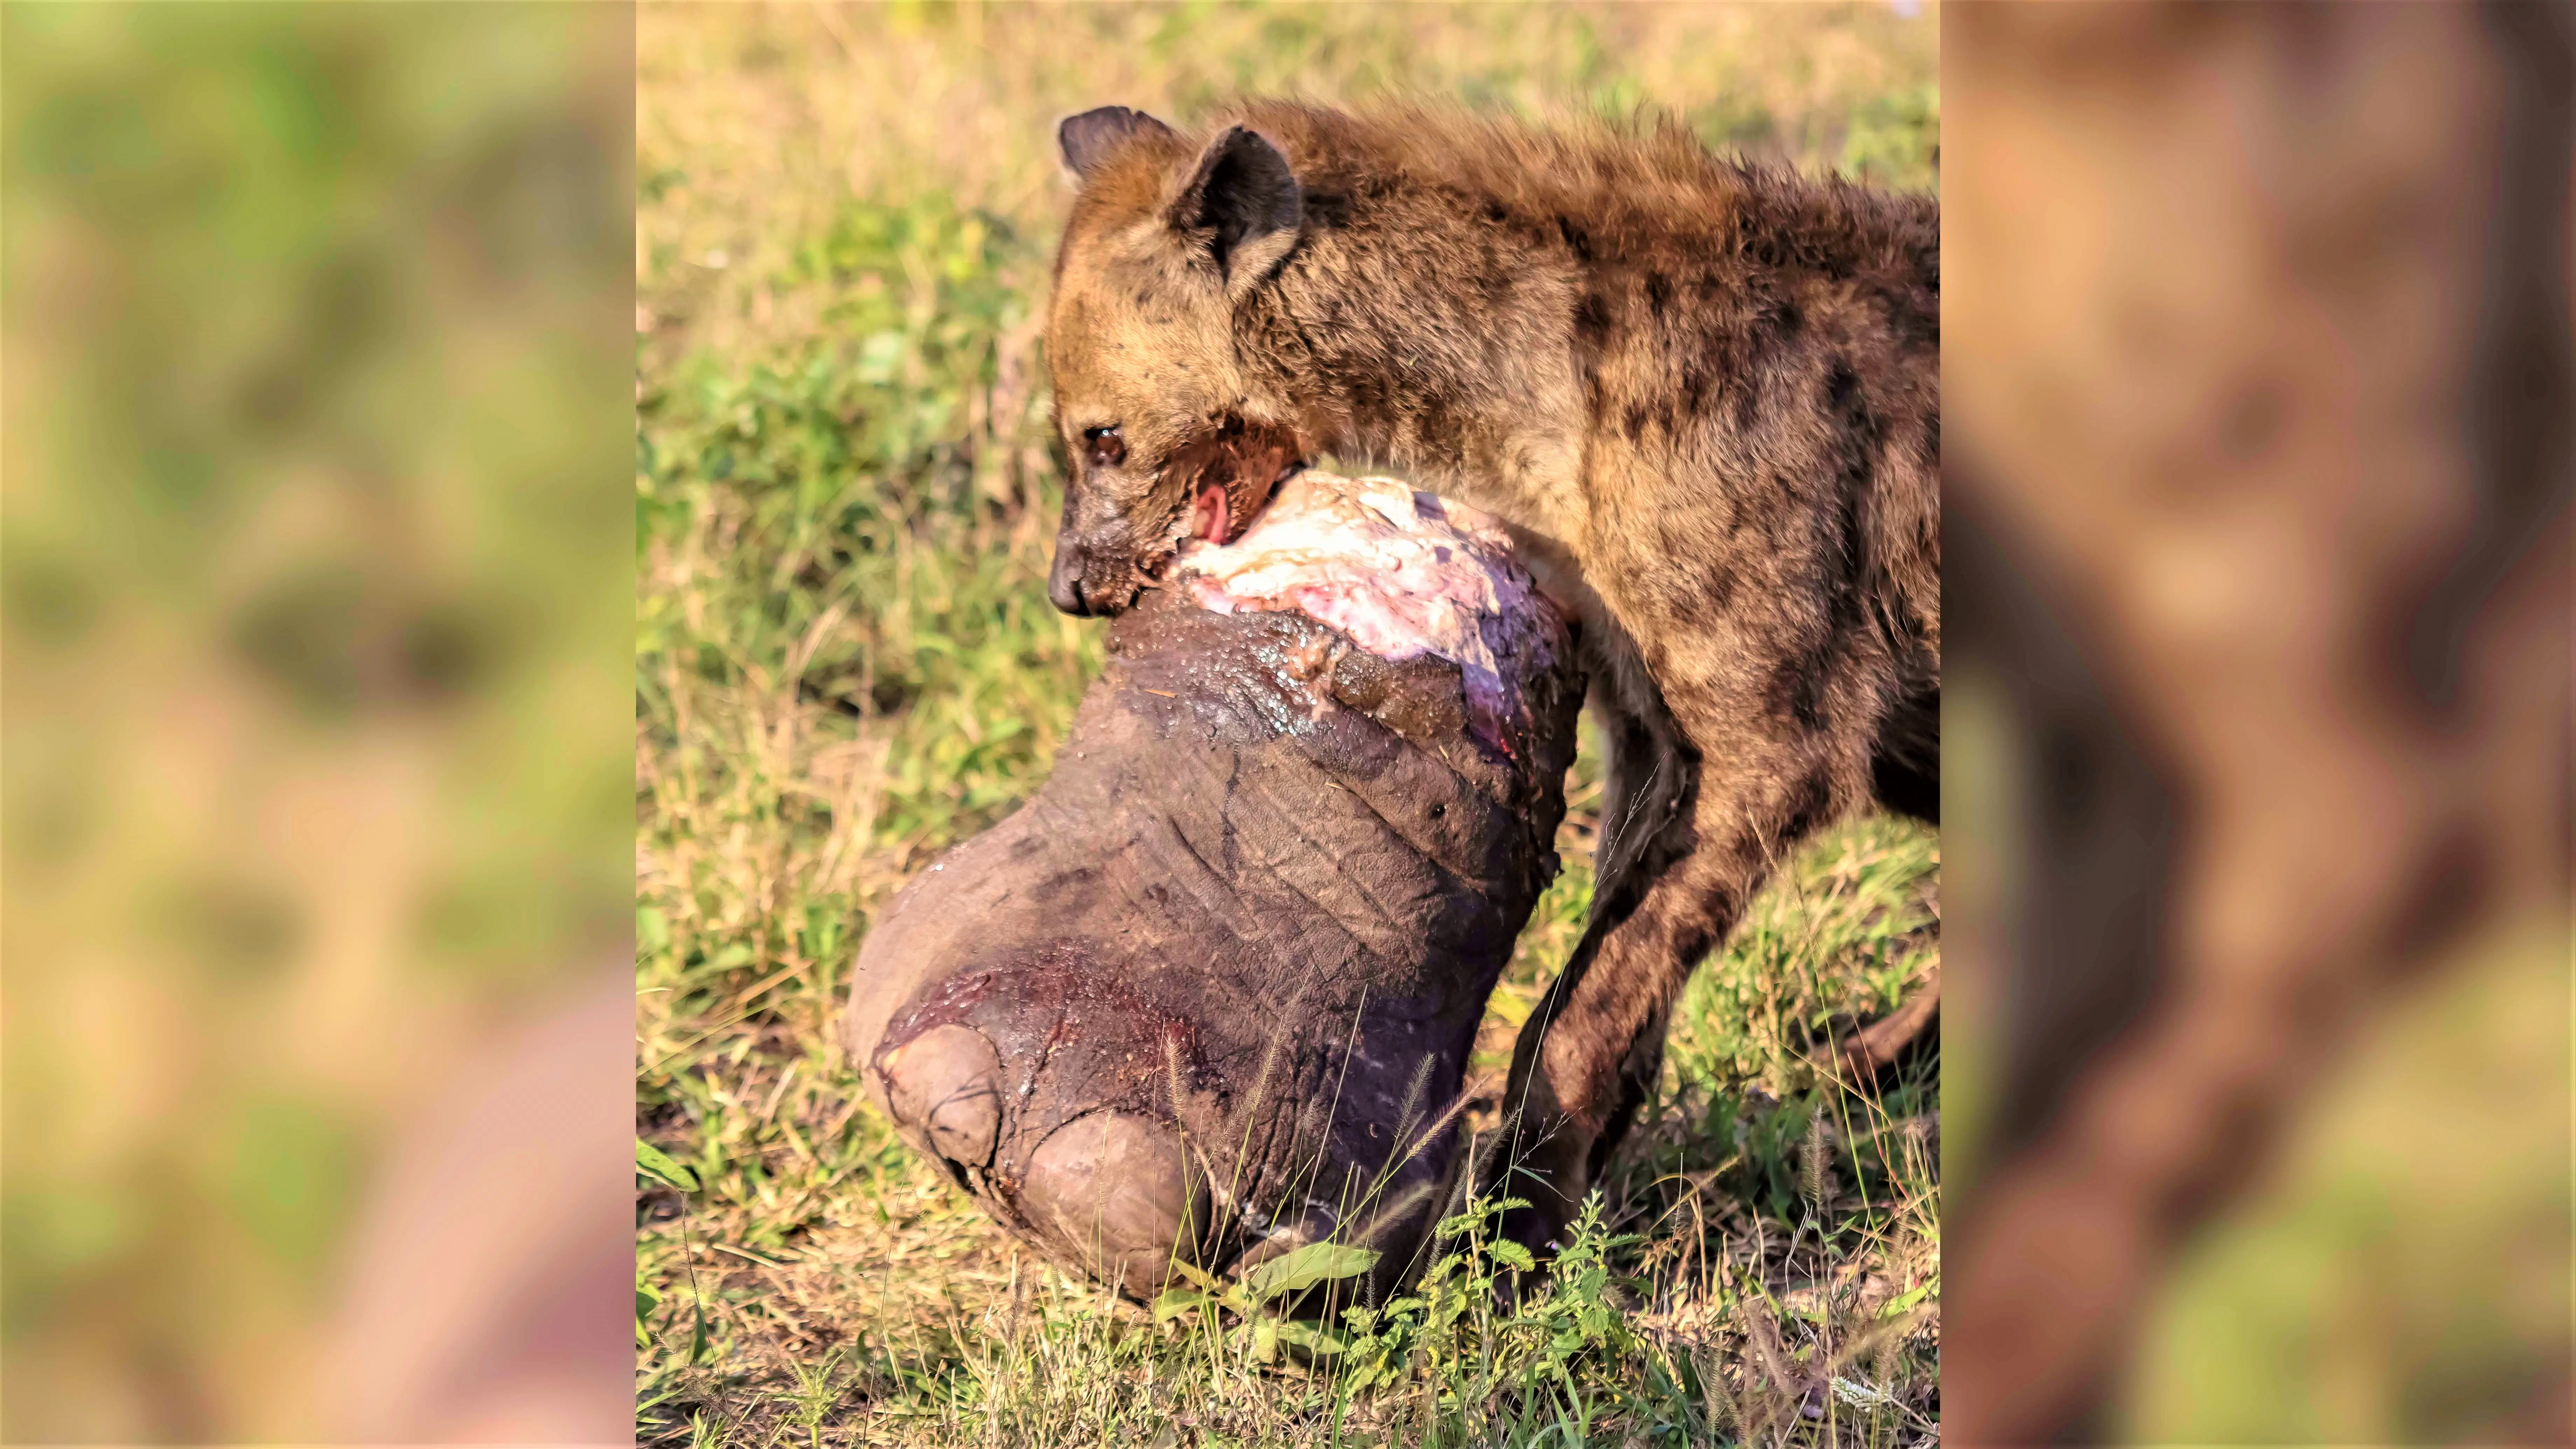 Hyena Gets Away With Elephant’s Giant Foot